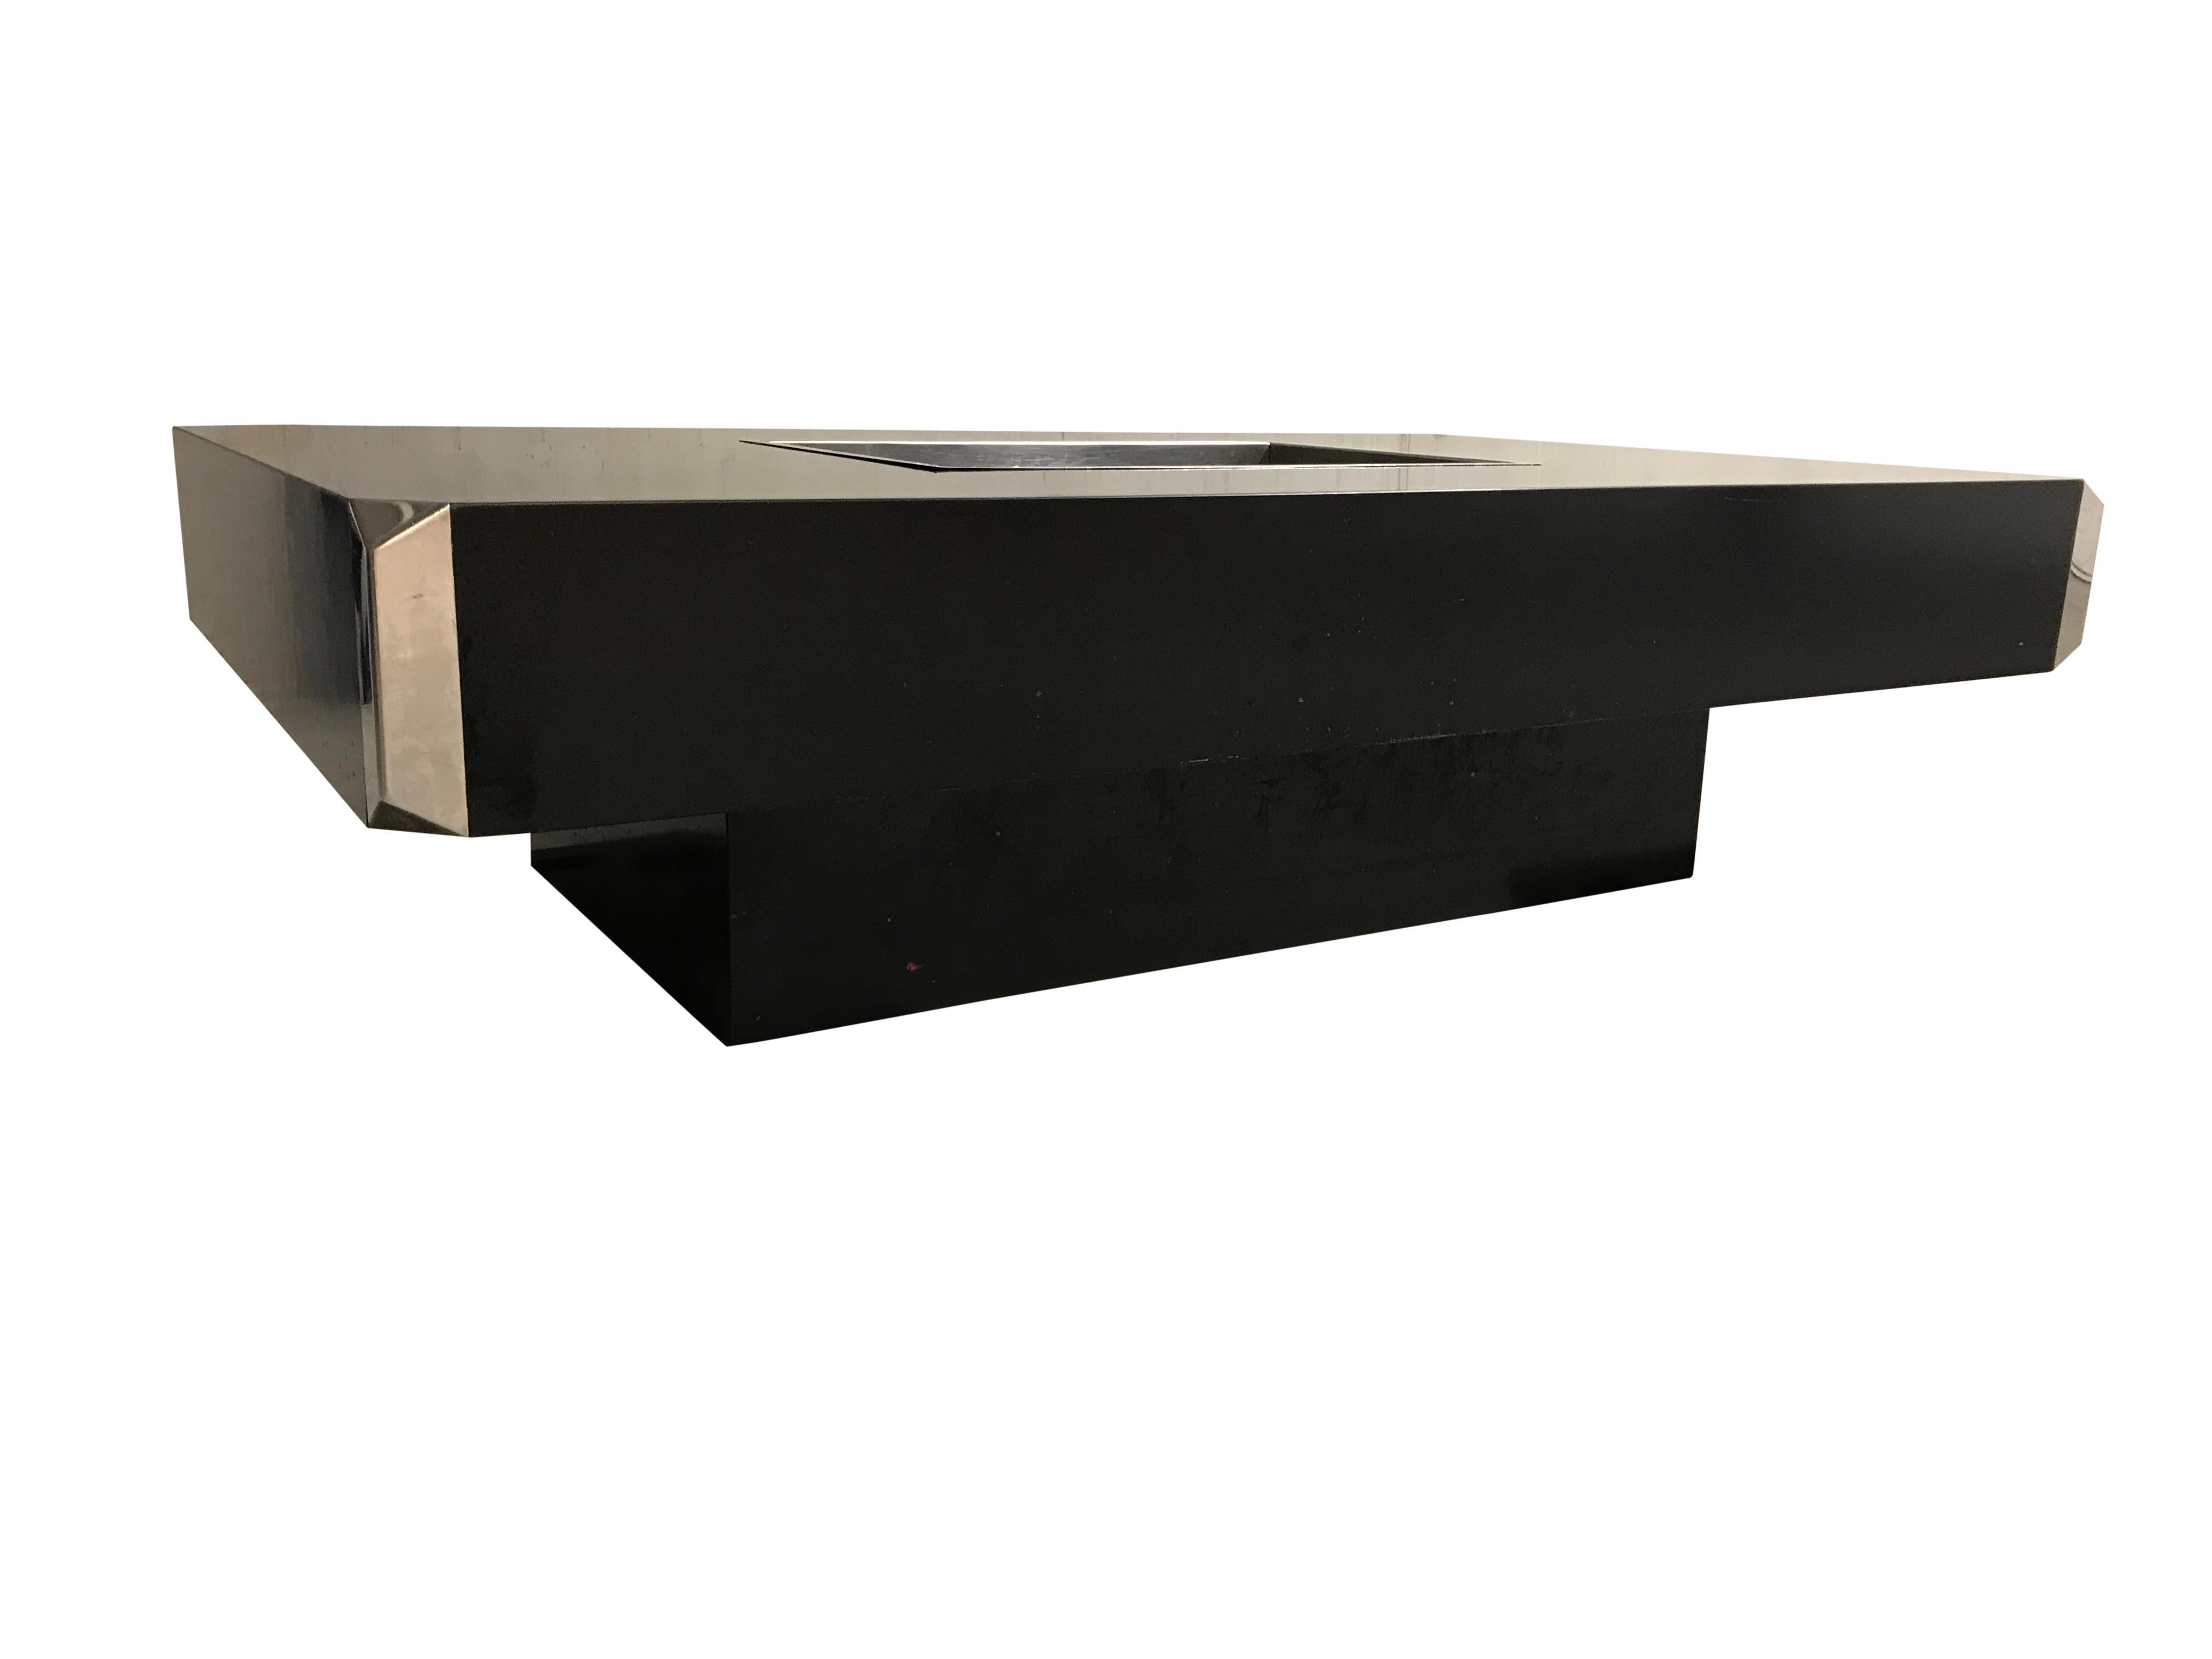 Luxurious bar coffee table made from black lacquered wood designed by Willy Rizzo.

The table is in good condition with very minor user traces.

This table fits well in today's interiors thanks to its luxurious and timeless appeal.

1970s,